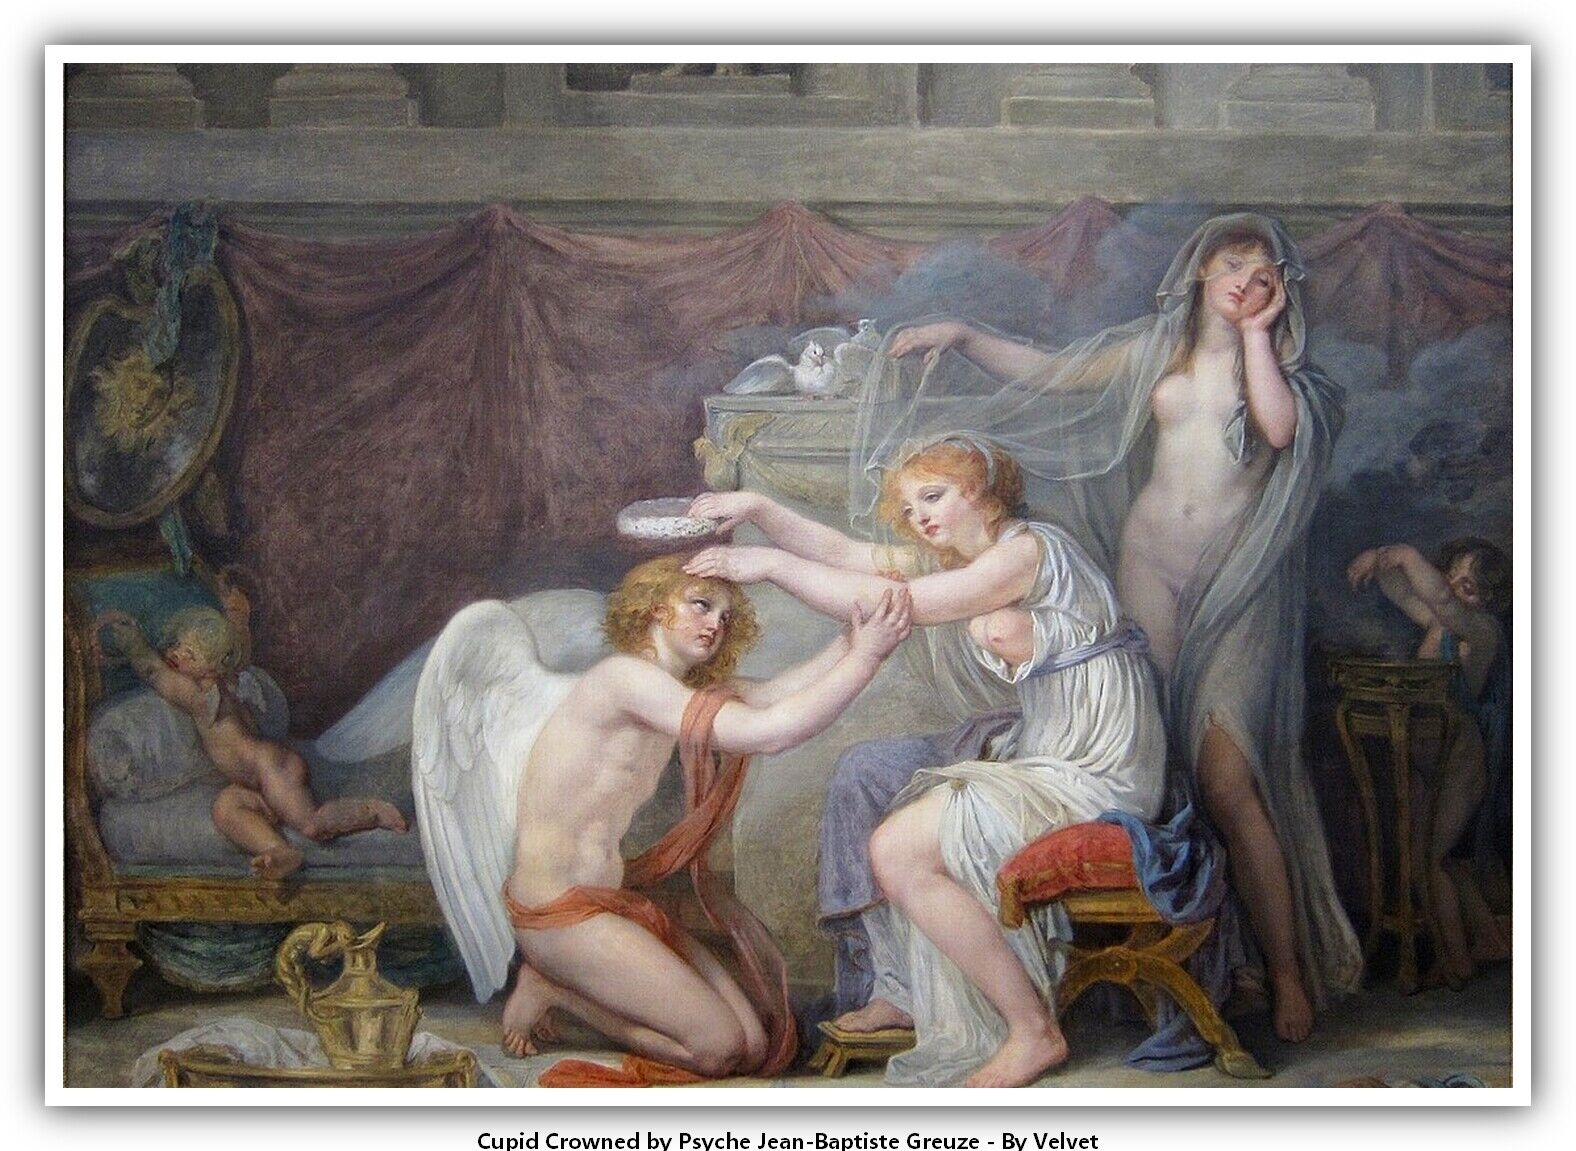 Cupid Crowned by Psyche Jean-Baptiste Greuze